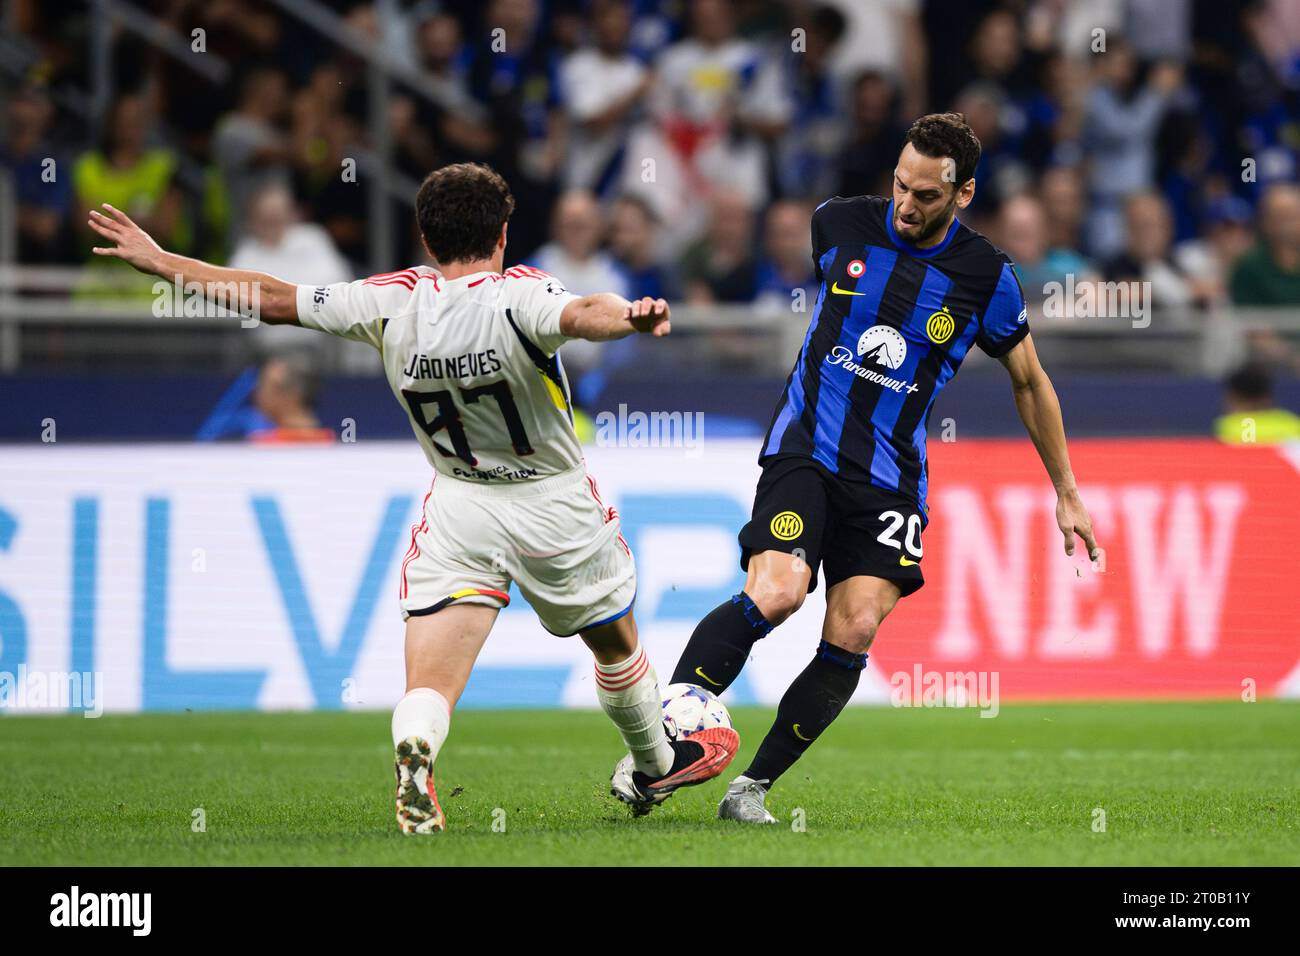 Hakan Calhanoglu of FC Internazionale competes for the ball with Joao Neves of SL Benfica during the UEFA Champions League football match between FC Internazionale and SL Benfica. Stock Photo